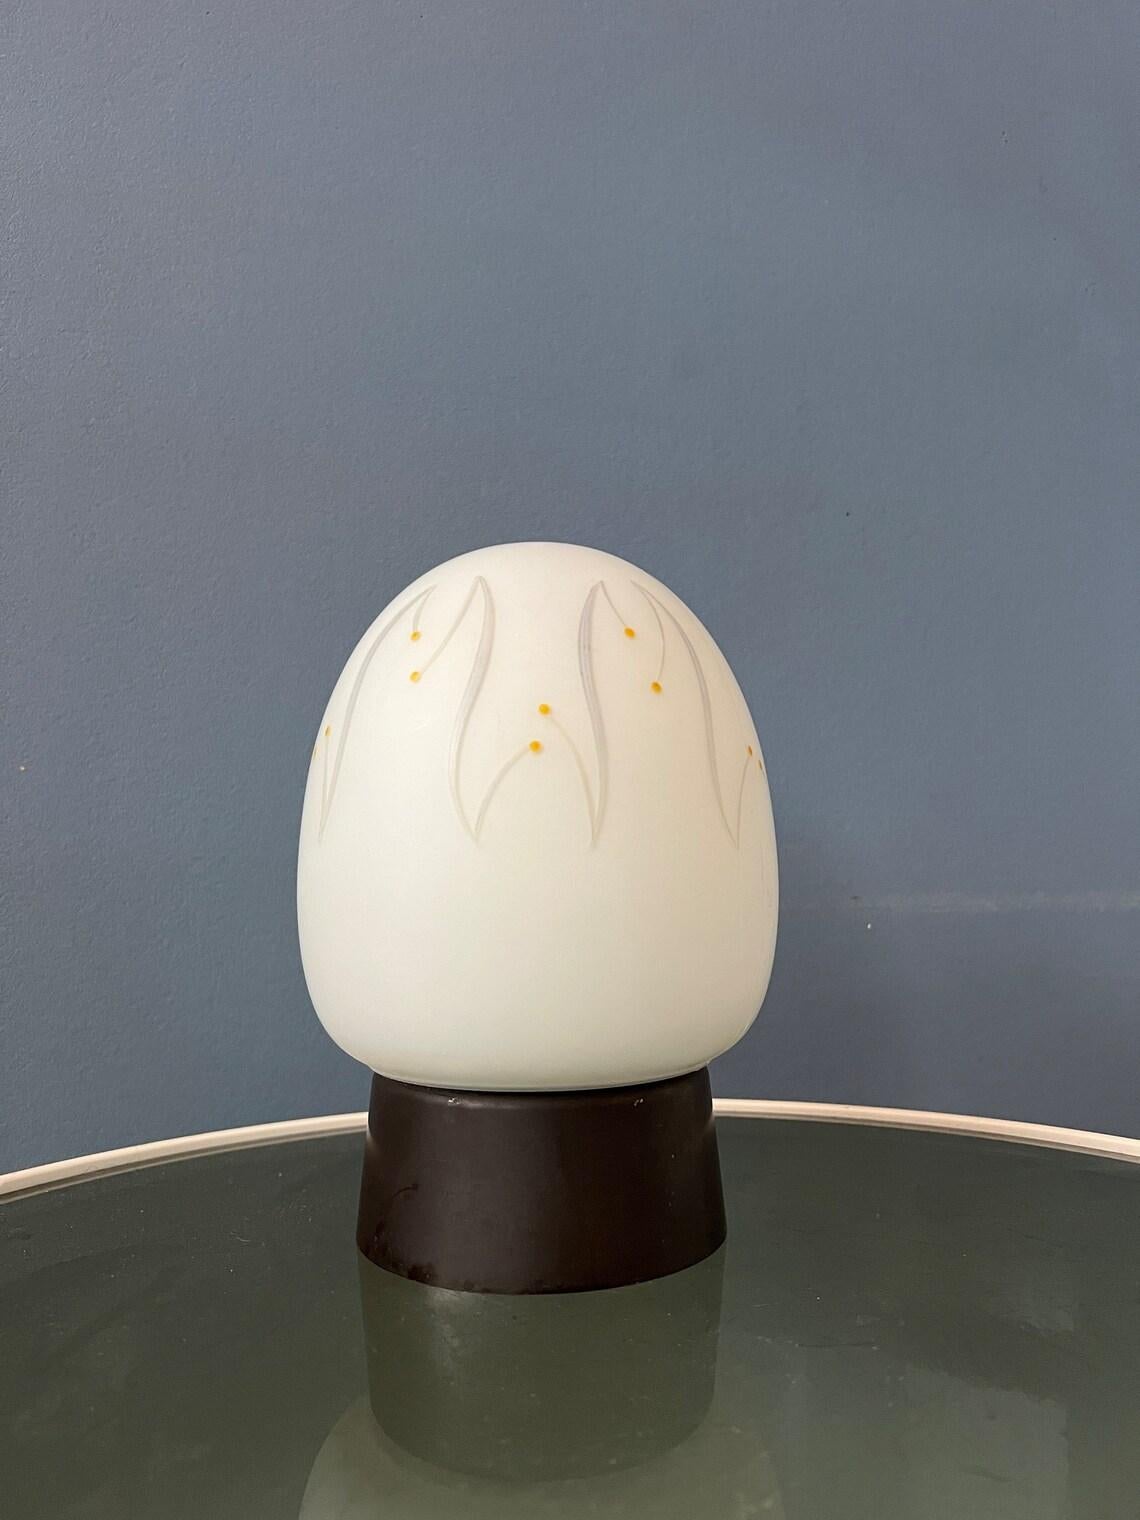 Vintage Egg Thabur Ceiling Lamp with Decorative Pattern, 1970s For Sale 1